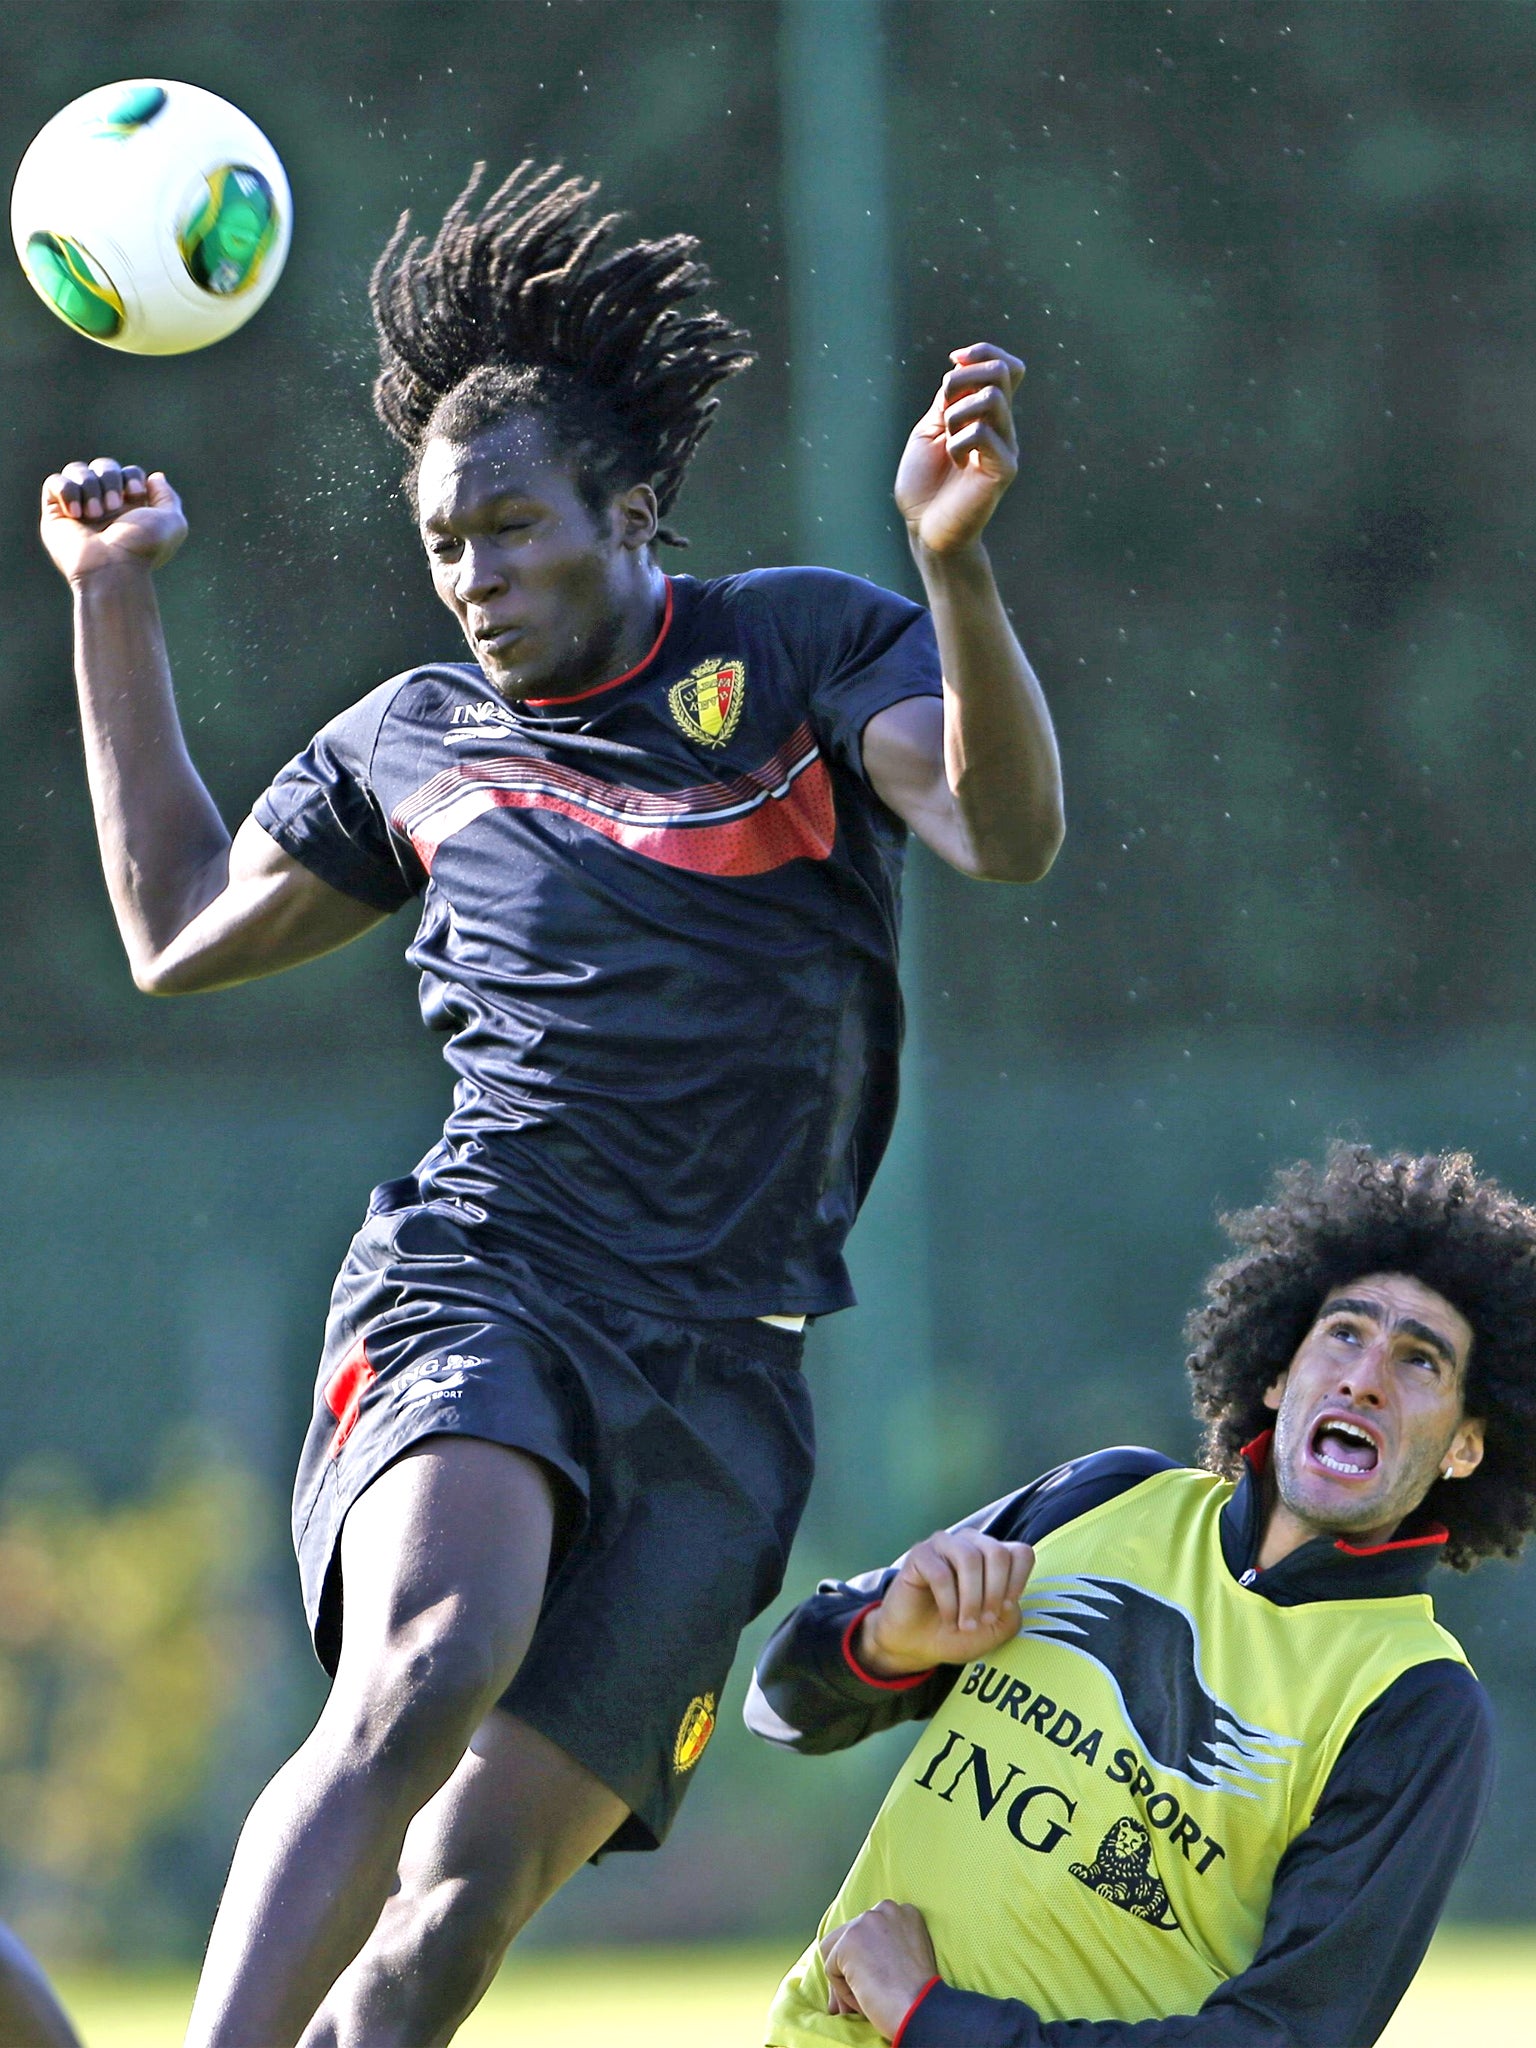 Romelu Lukaku (left) and Marouane Fellaini take part in a training session in Brussels ahead of Belgium’s game against Scotland